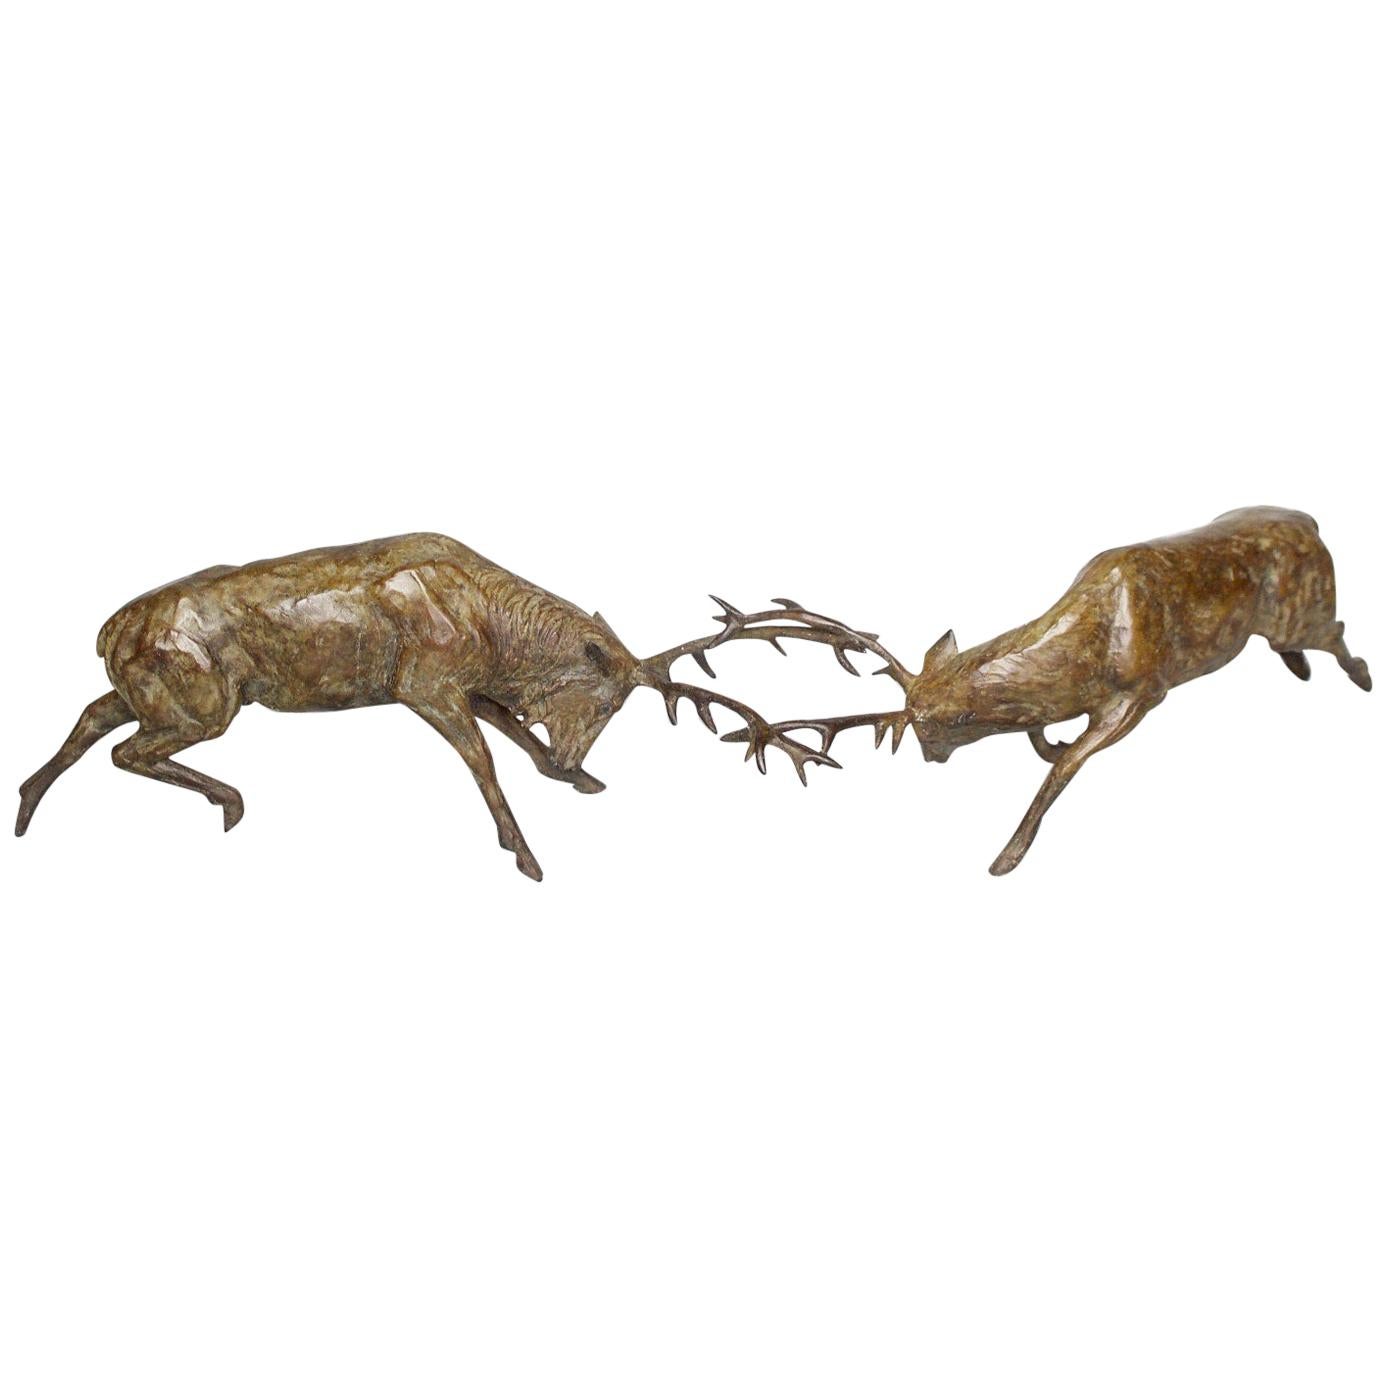 'Fighting Stags' Limited Edition Contemporary Bronze Sculpture by Jenna Gearing